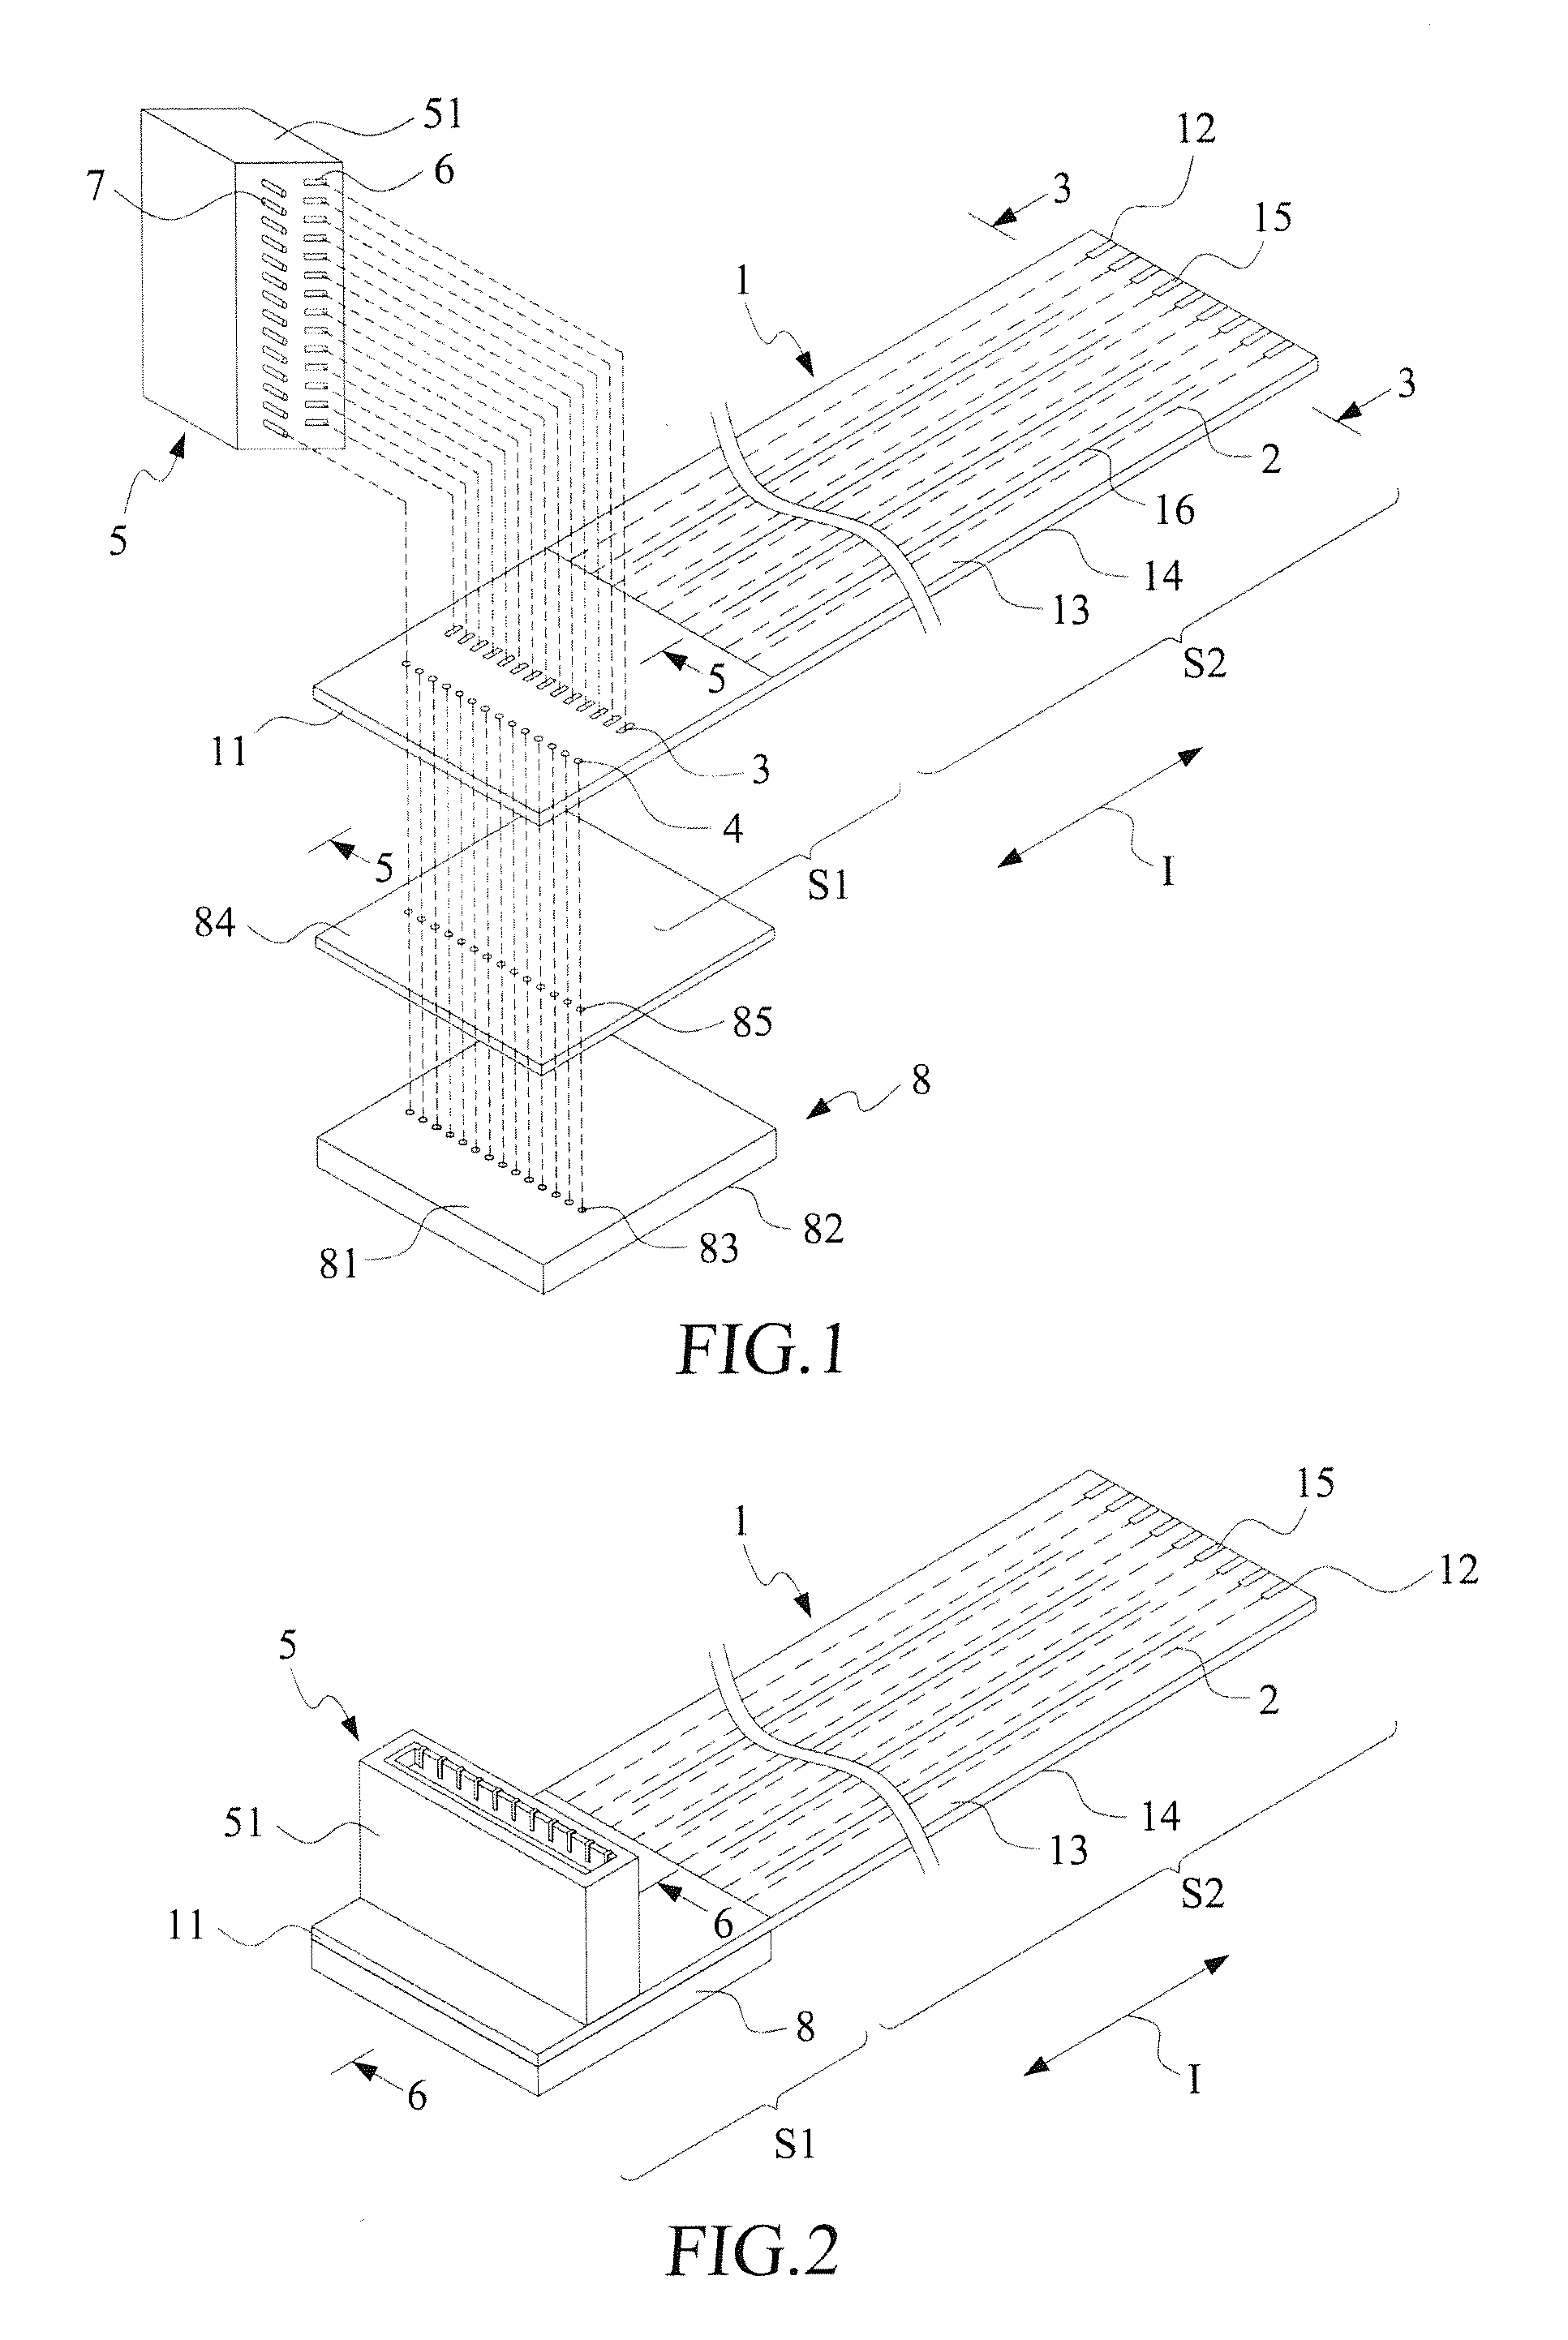 Soldering structure for mounting connector on flexible circuit board